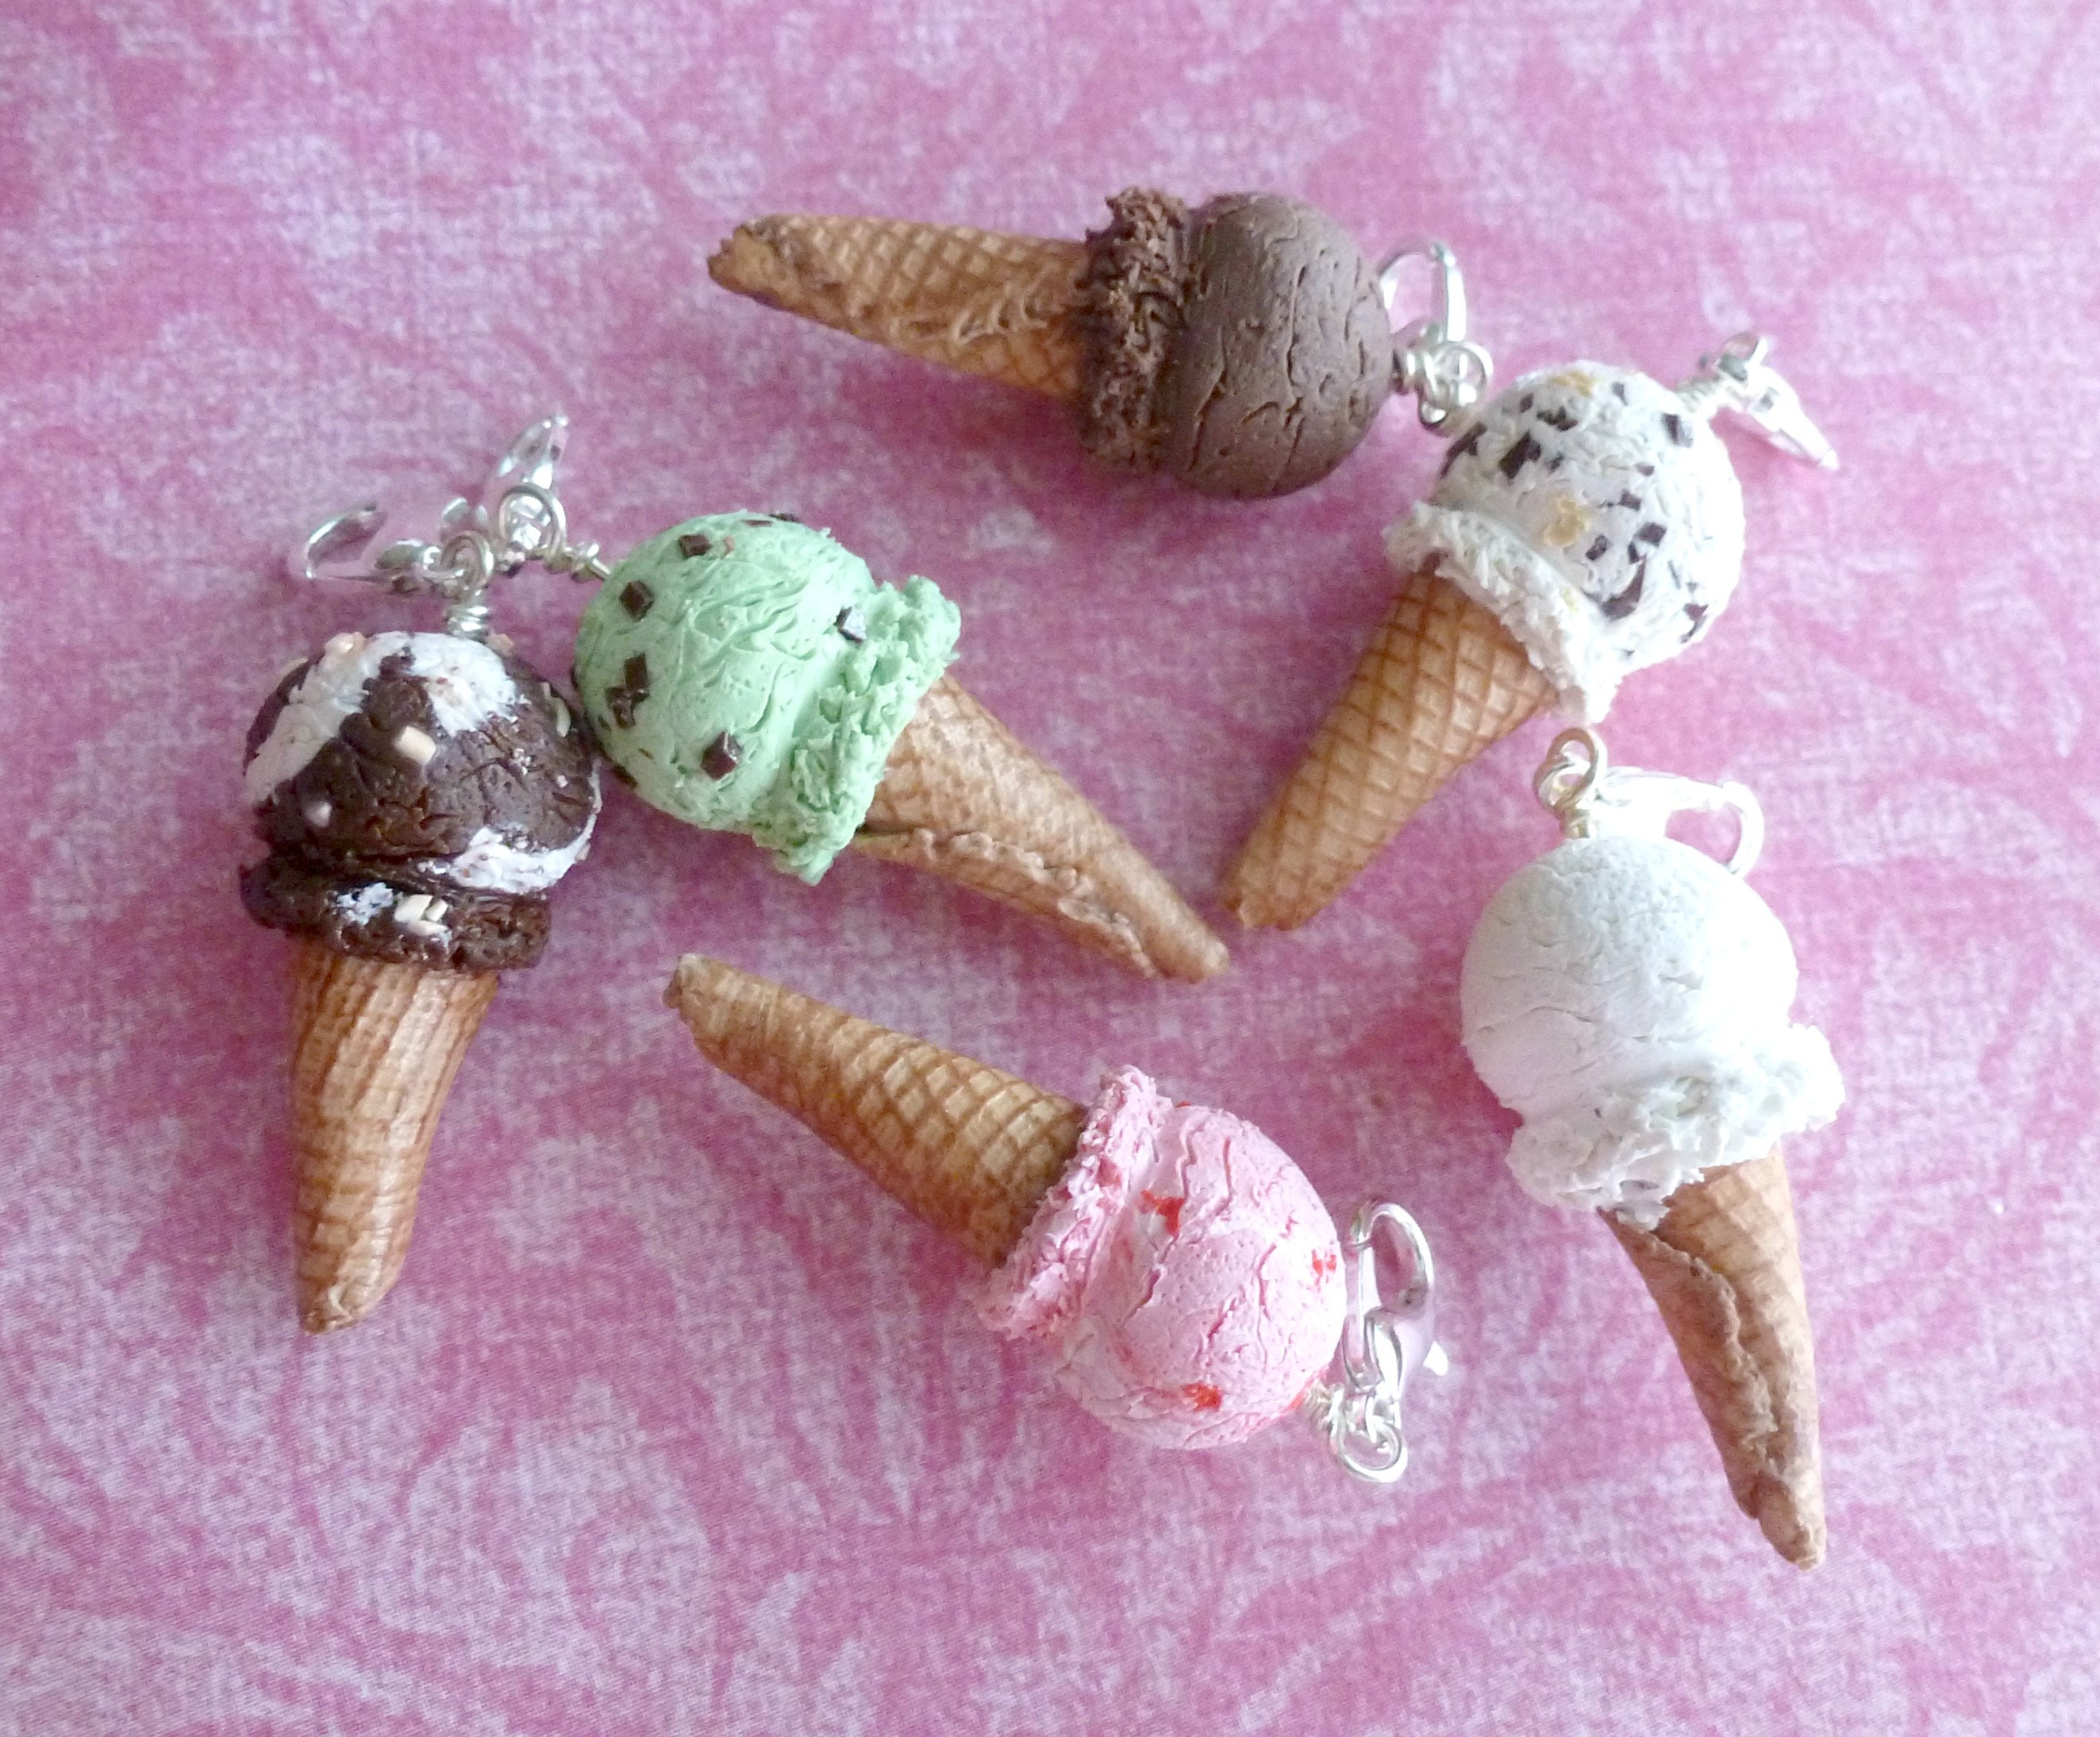  Hicarer 48 Pieces Resin Ice Cream Cup Charms Pendants